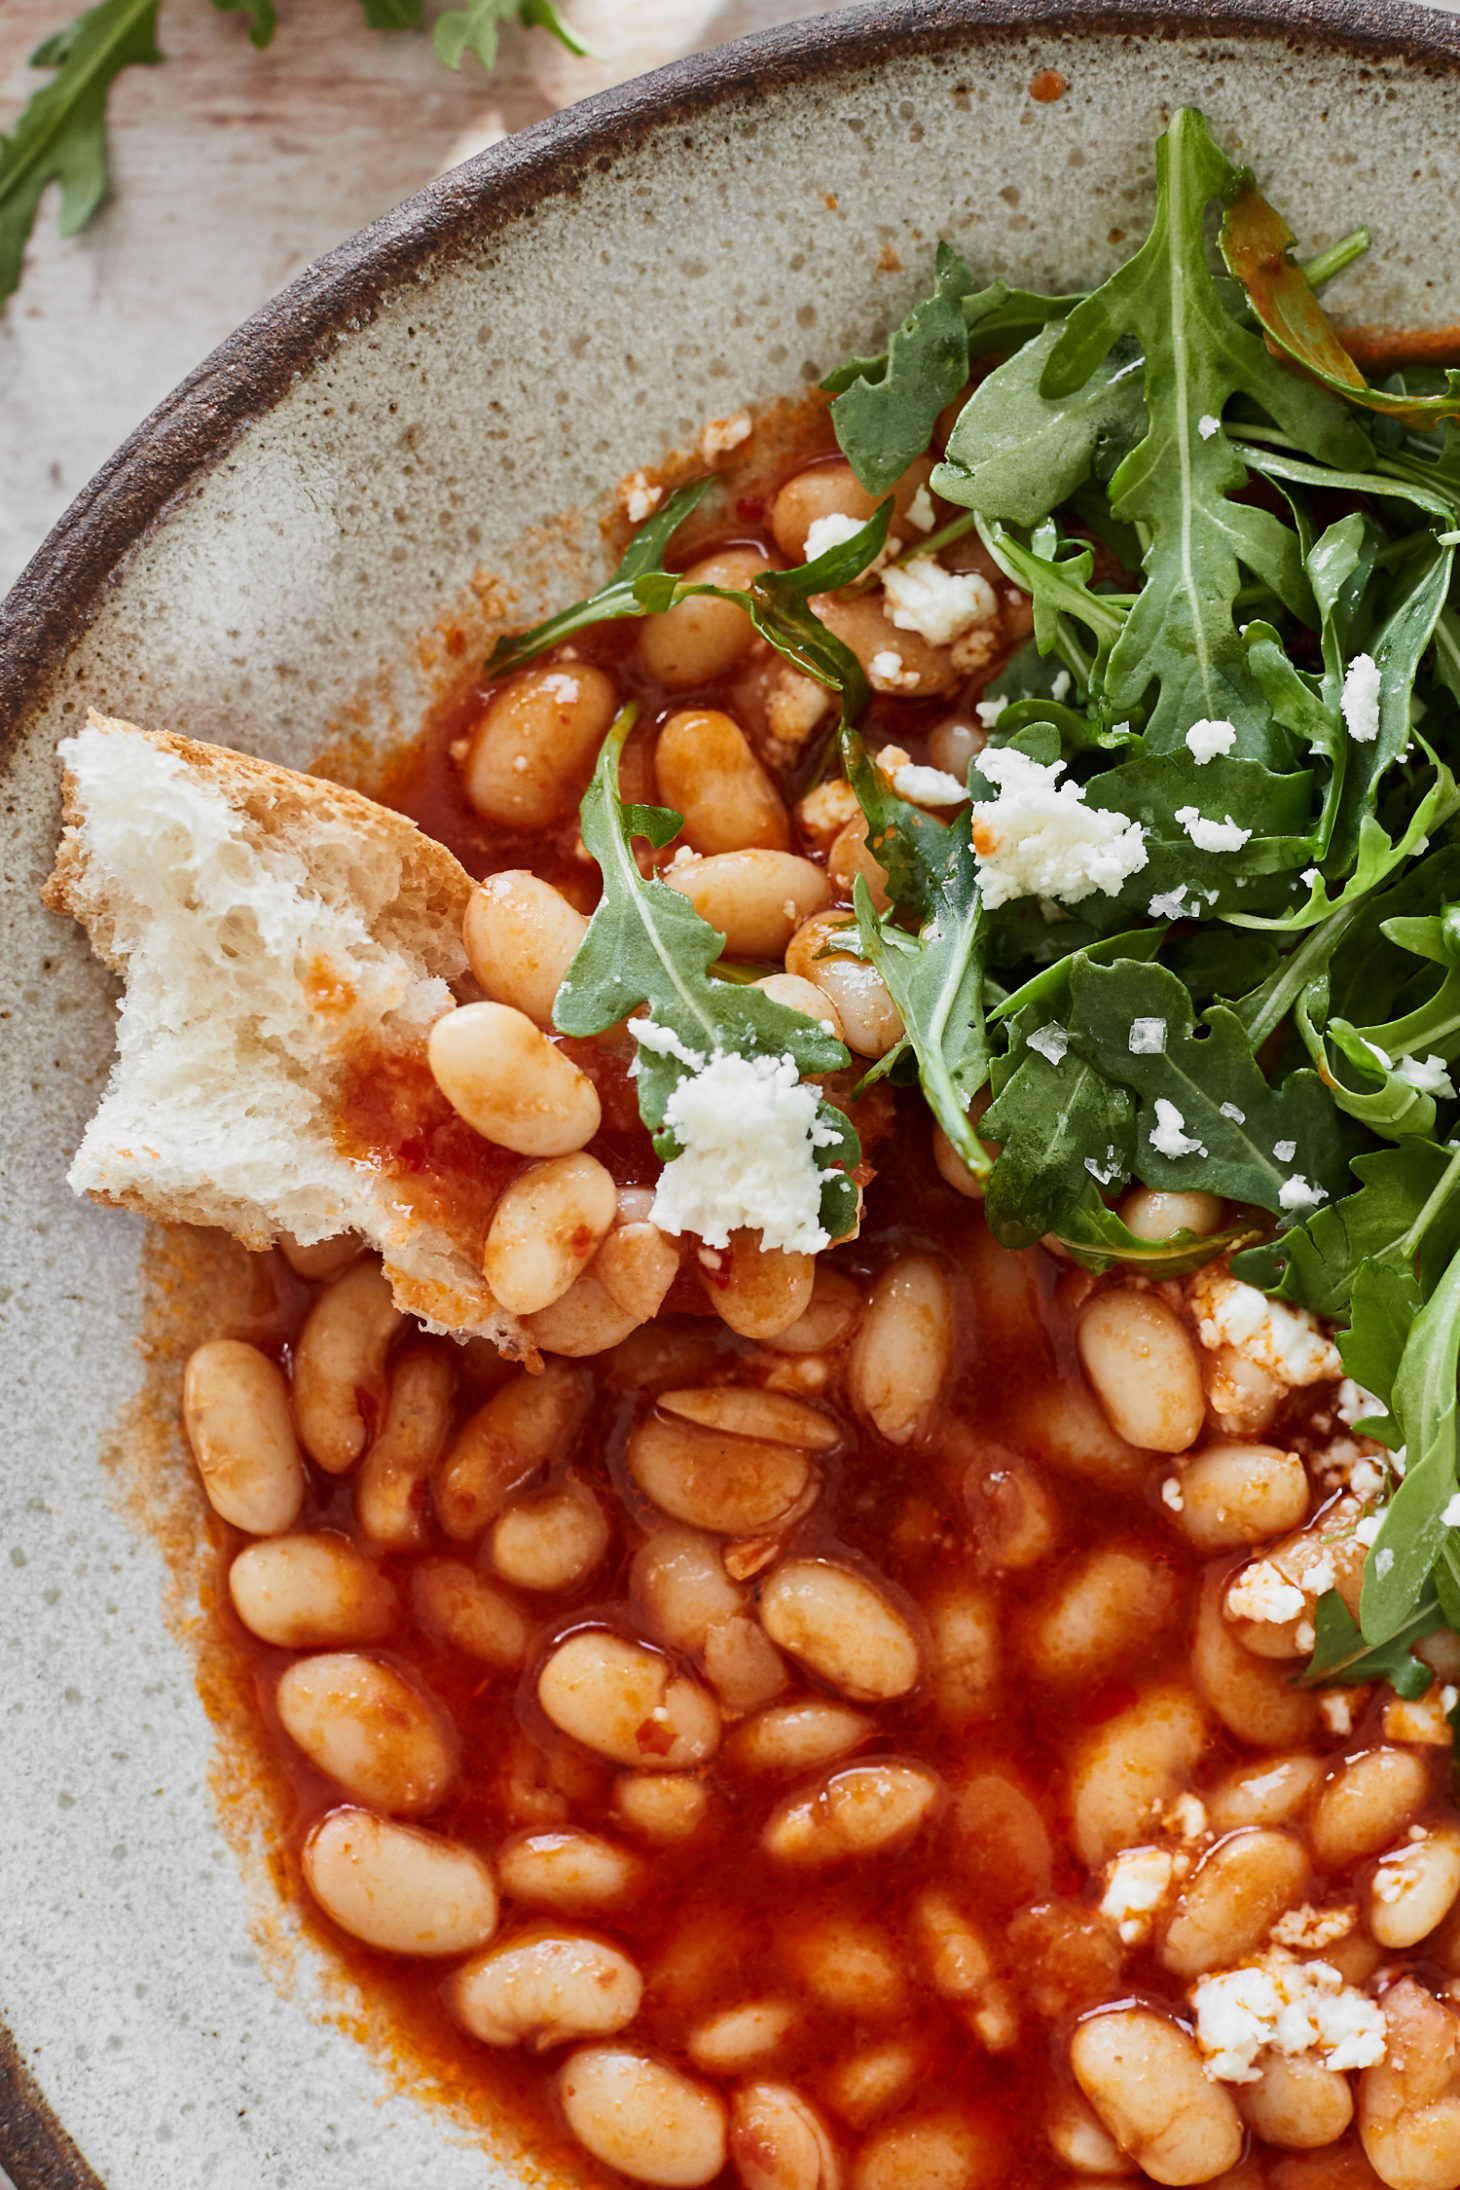 Close-up image of a piece of bread topped with beans in a red broth.